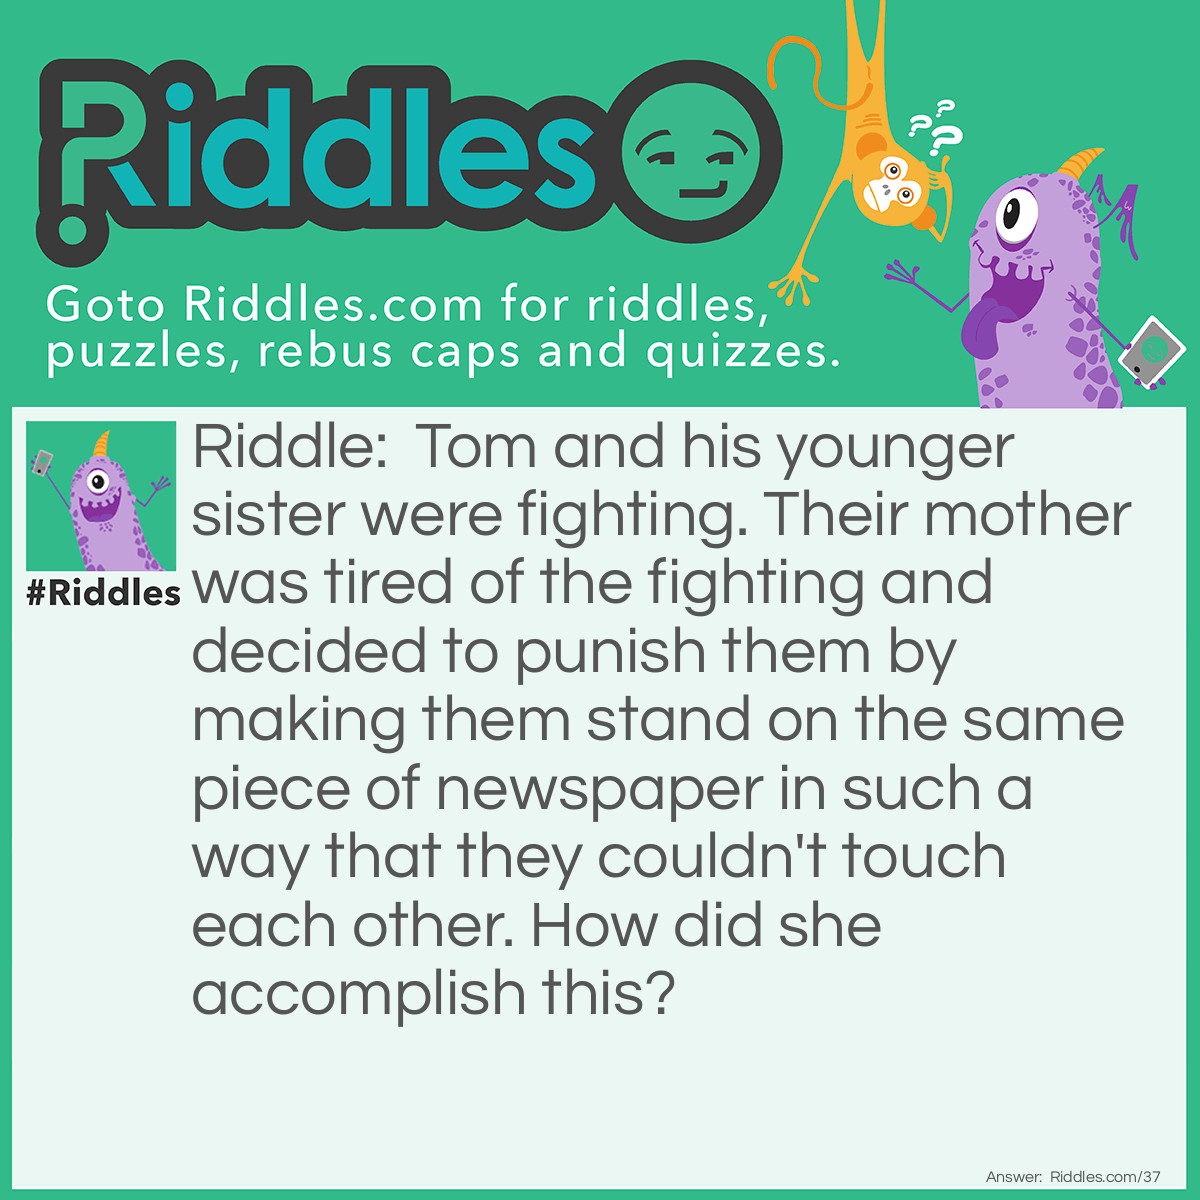 Riddle: Tom and his younger sister were fighting. Their mother was tired of the fighting and decided to punish them by making them stand on the same piece of newspaper in such a way that they couldn't touch each other. How did she accomplish this? Answer: Tom's <a href="/quiz/mothers-day-riddles">mother</a> slid a newspaper under a door, each sibling standing on each side.